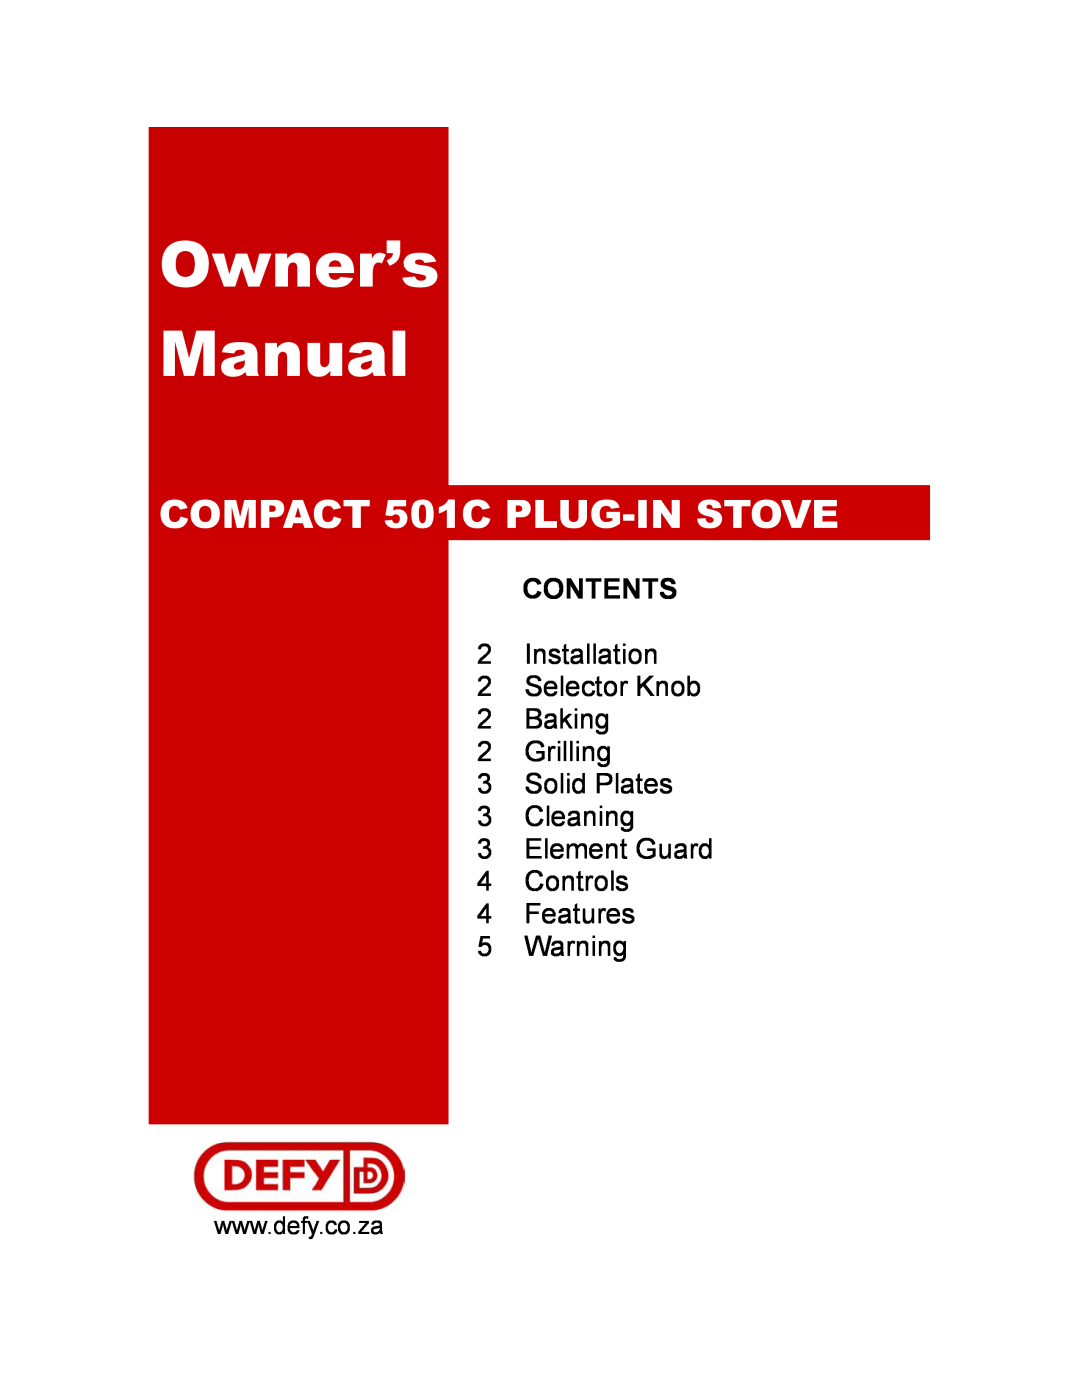 Defy Appliances owner manual Owner’s Manual, COMPACT 501C PLUG-IN STOVE, Contents 